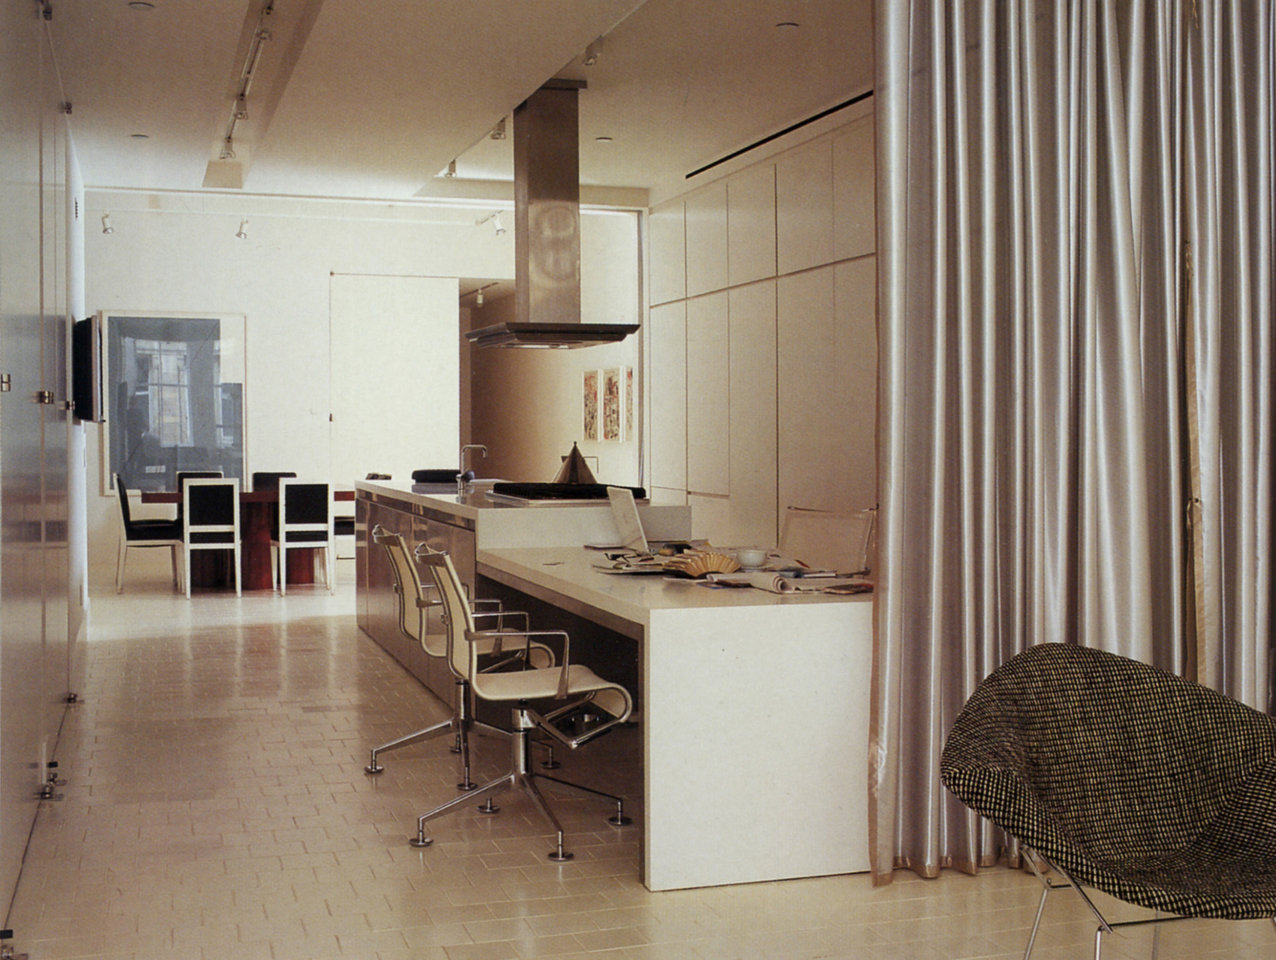 Open kitchen-office in white with modern white desk; dining table and black chairs in background, silver curtain in foreground.